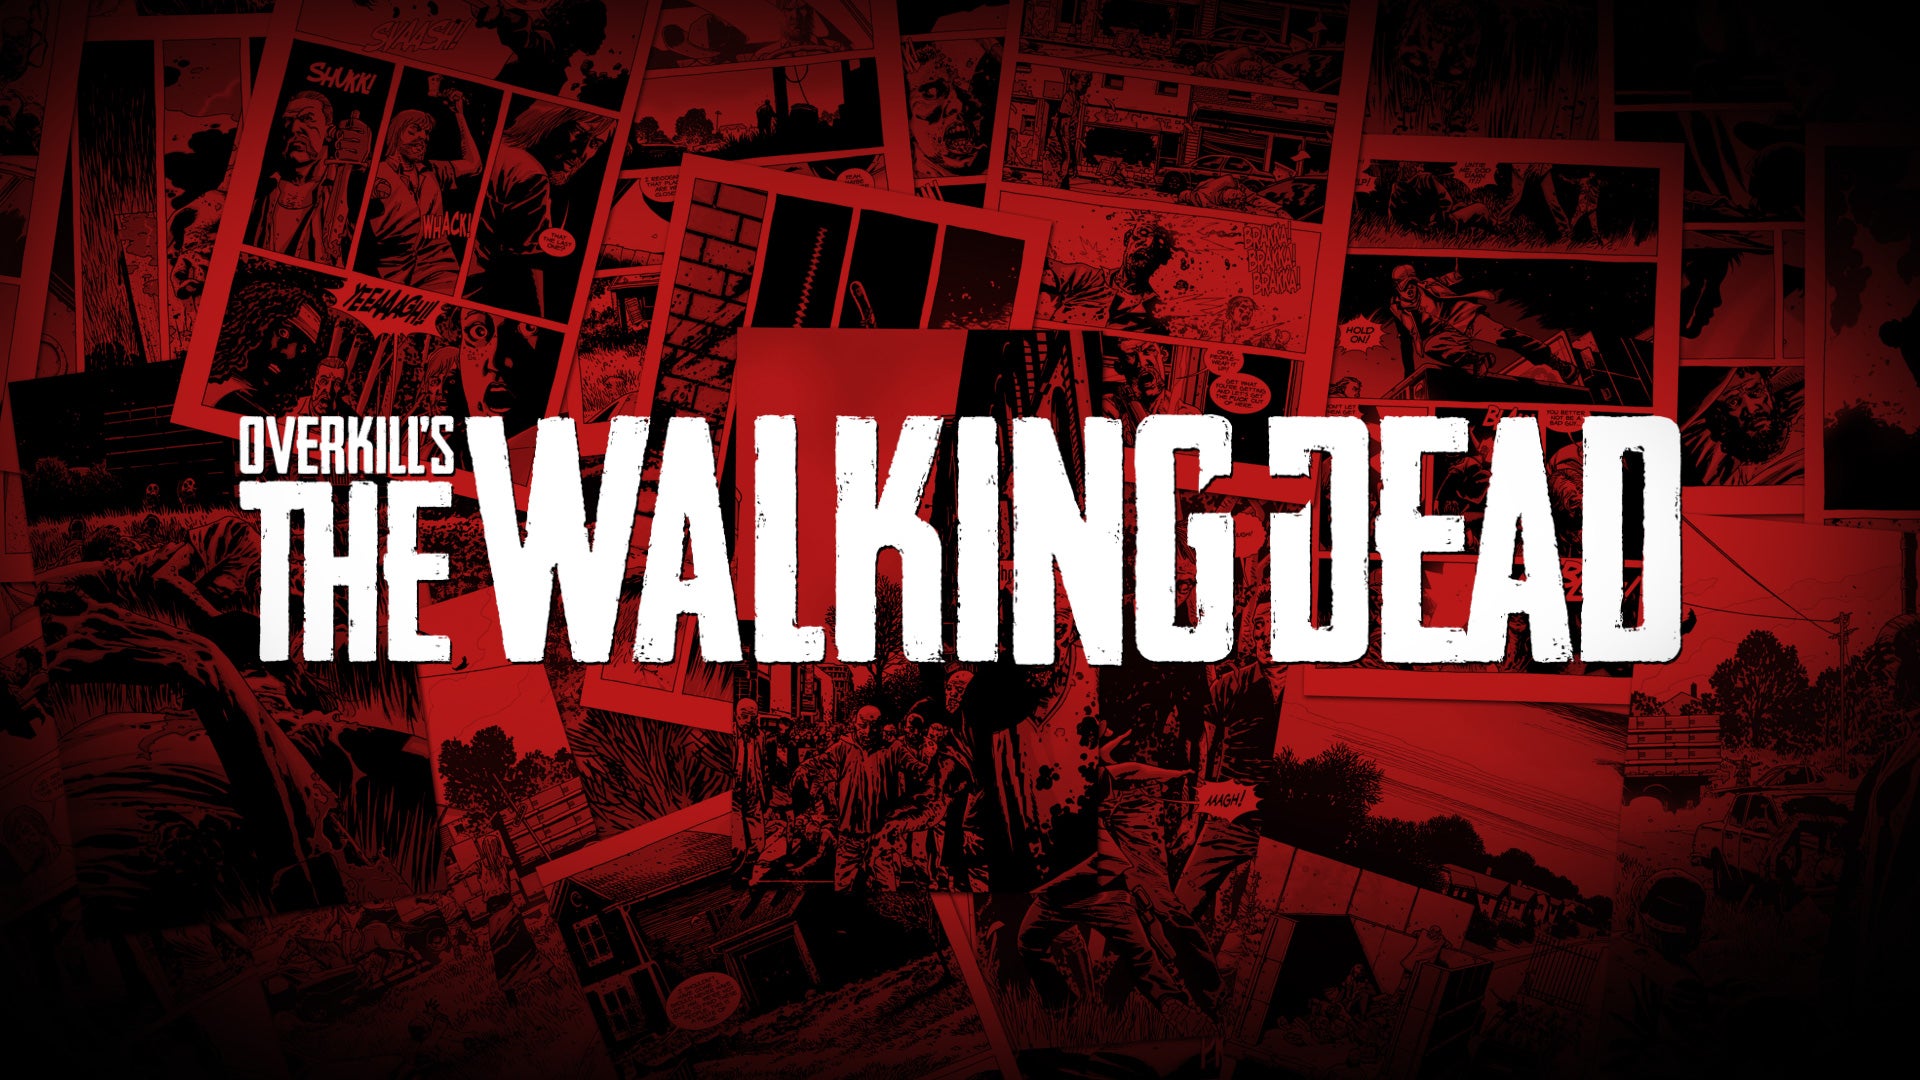 Image for Overkill's Walking Dead game delayed, Starbreeze to develop Crossfire game for Western market